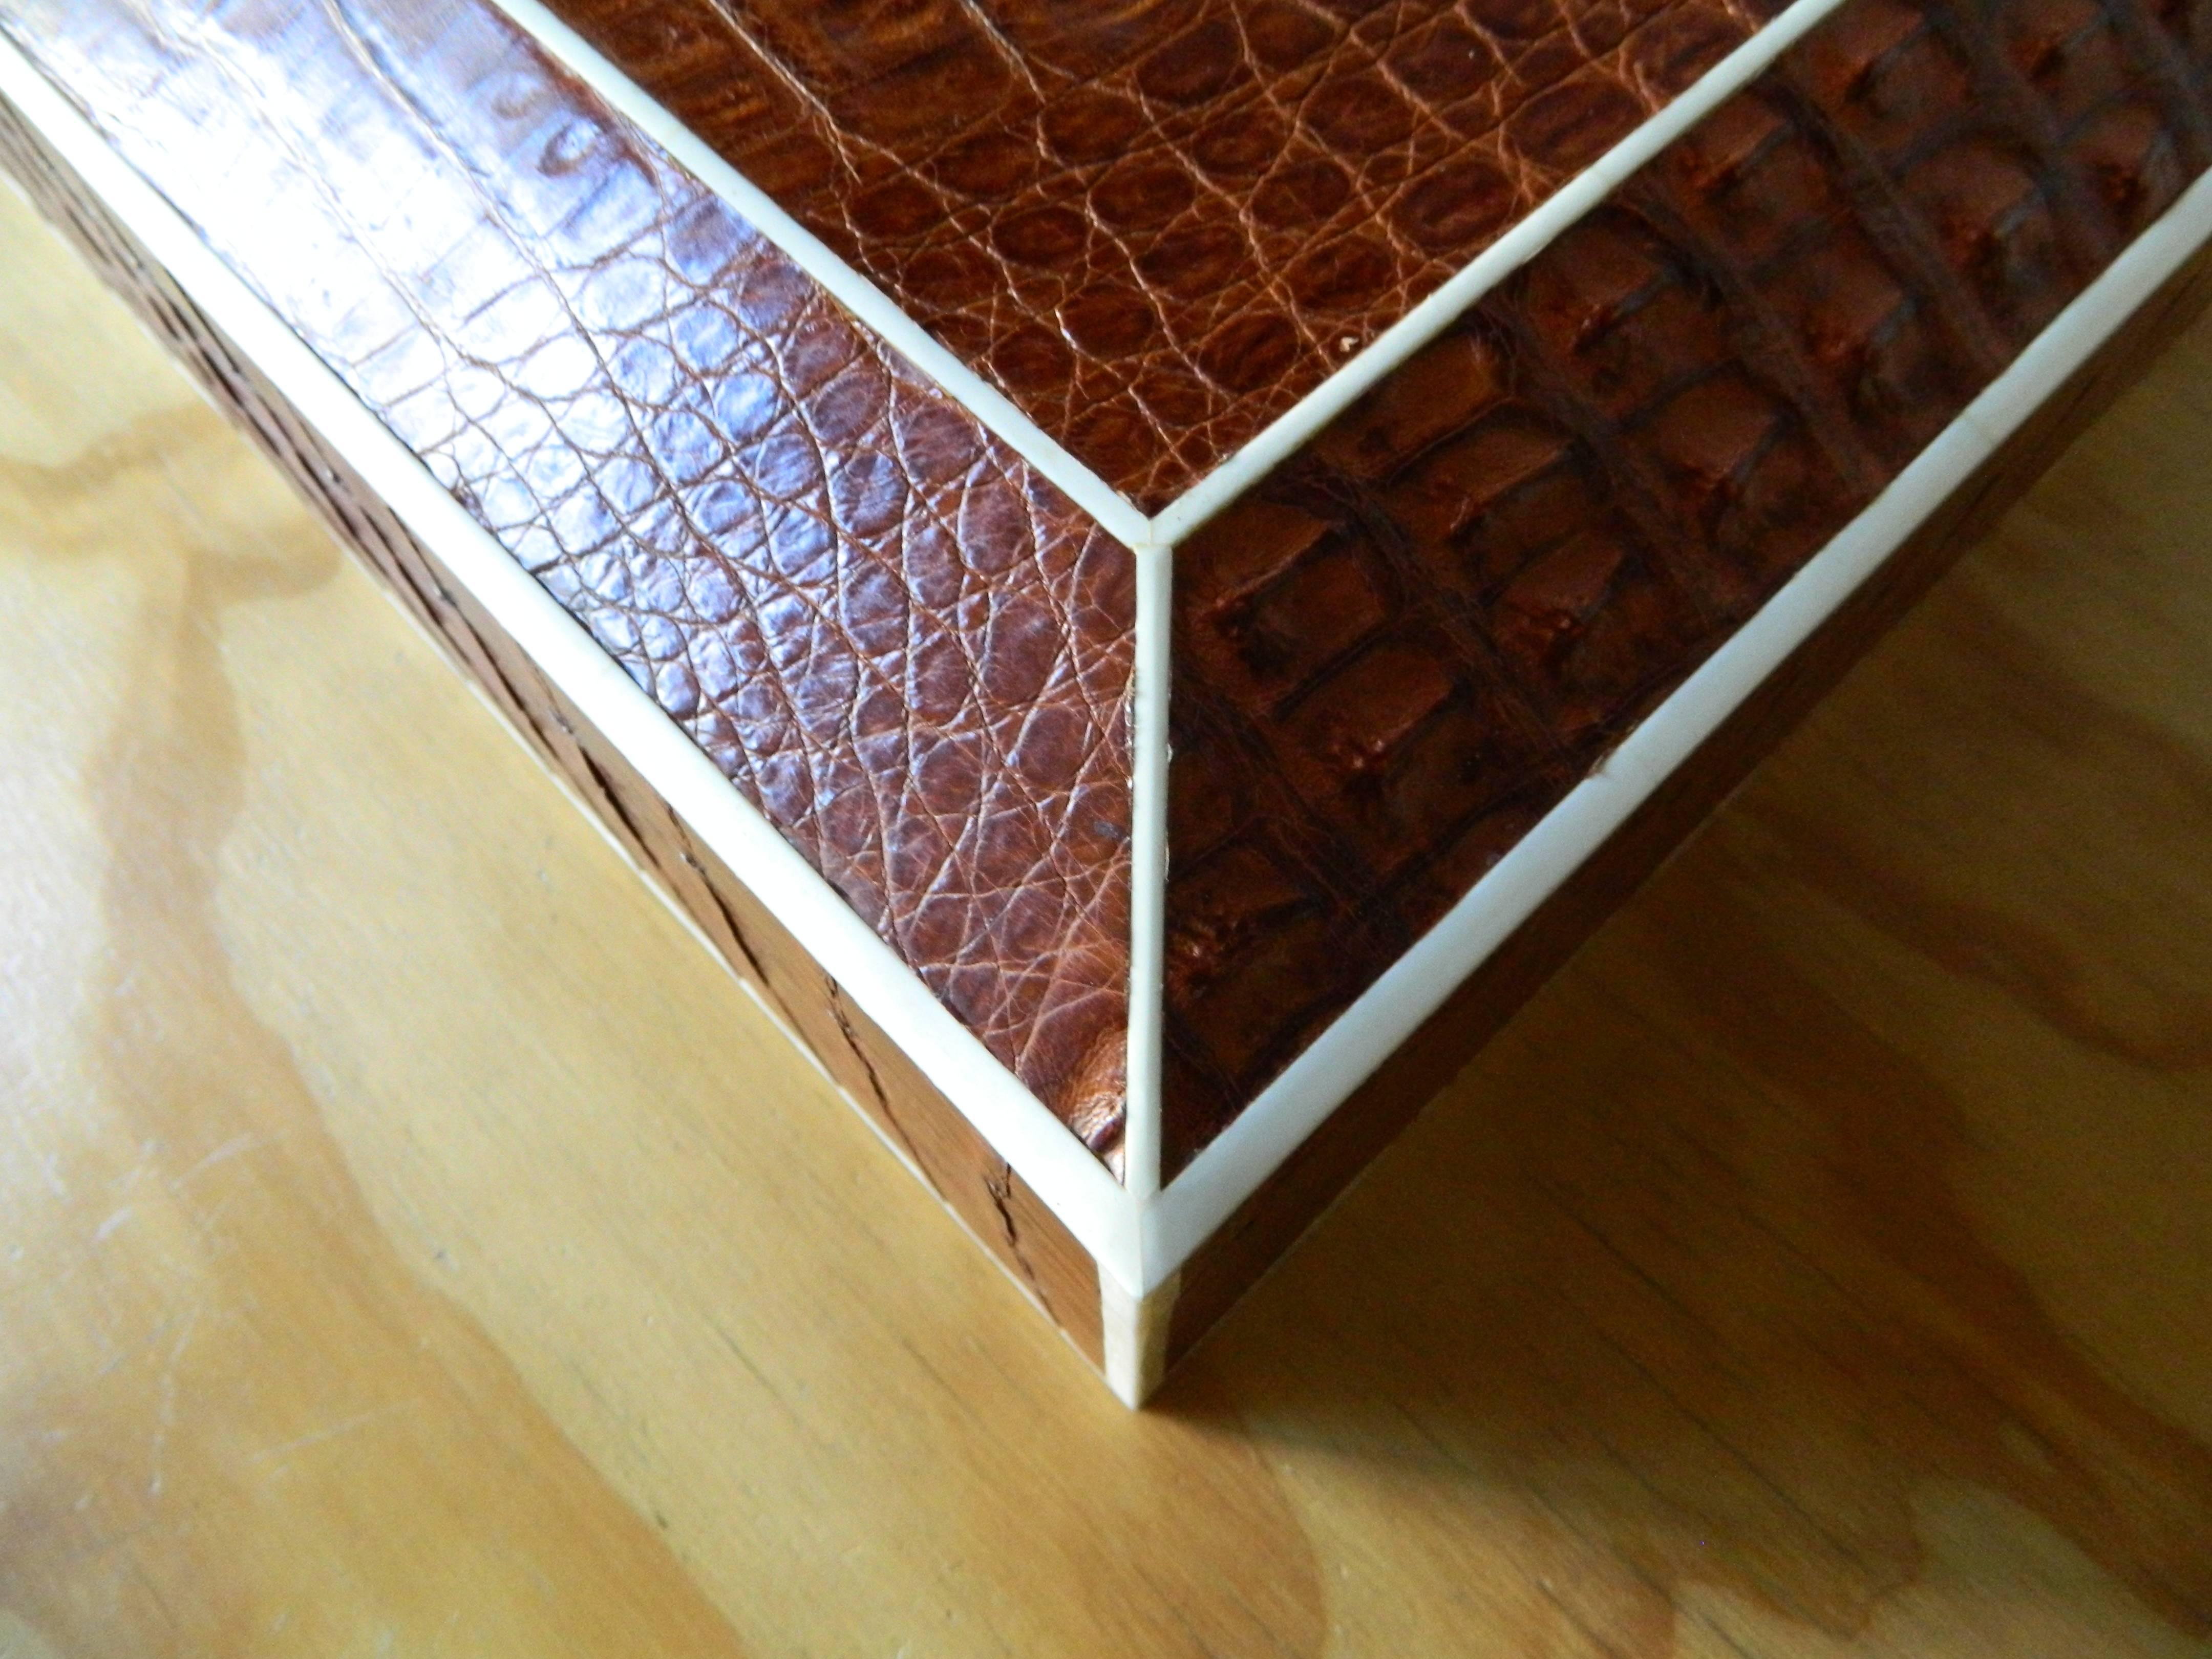 Large brown real crocodile skin box with bone inlay. Box has a removable compartment tray. interior made of massacre ebony wood.
